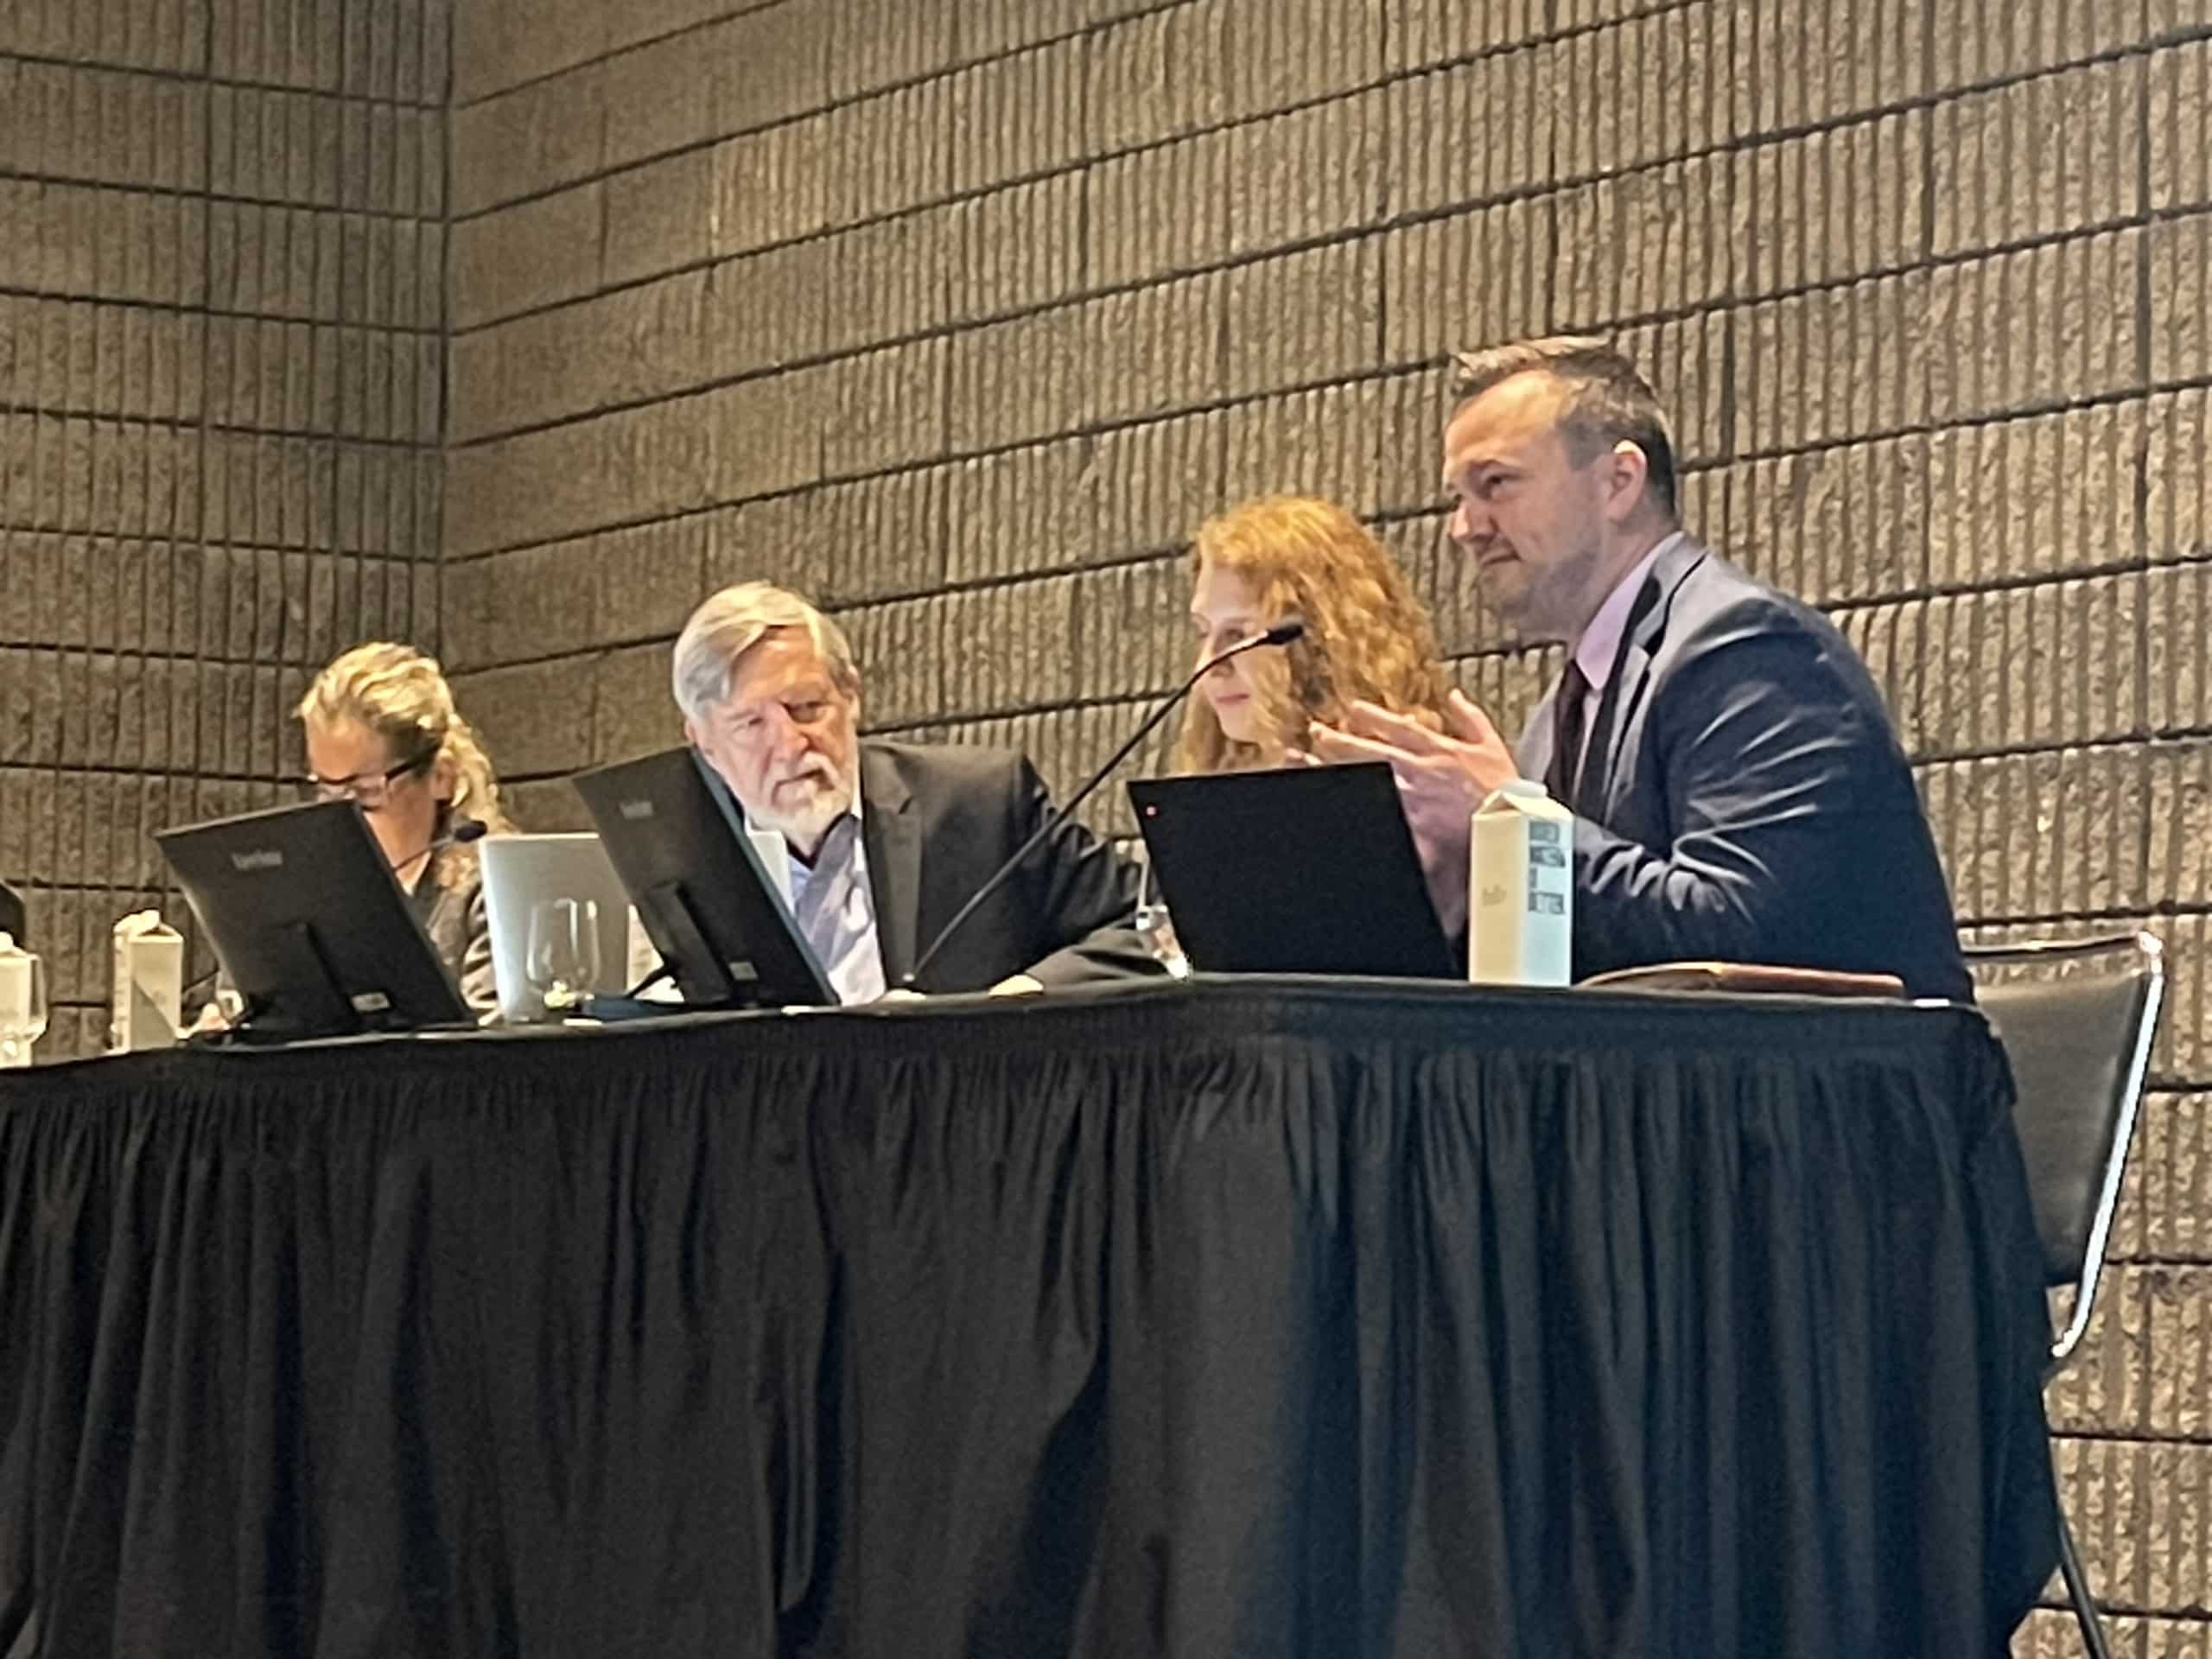 Seated on a stage with three others, Michael Ward, Alliance Vice President of Public Policy and Government Affairs, speaking on a panel at ISPOR 2024.